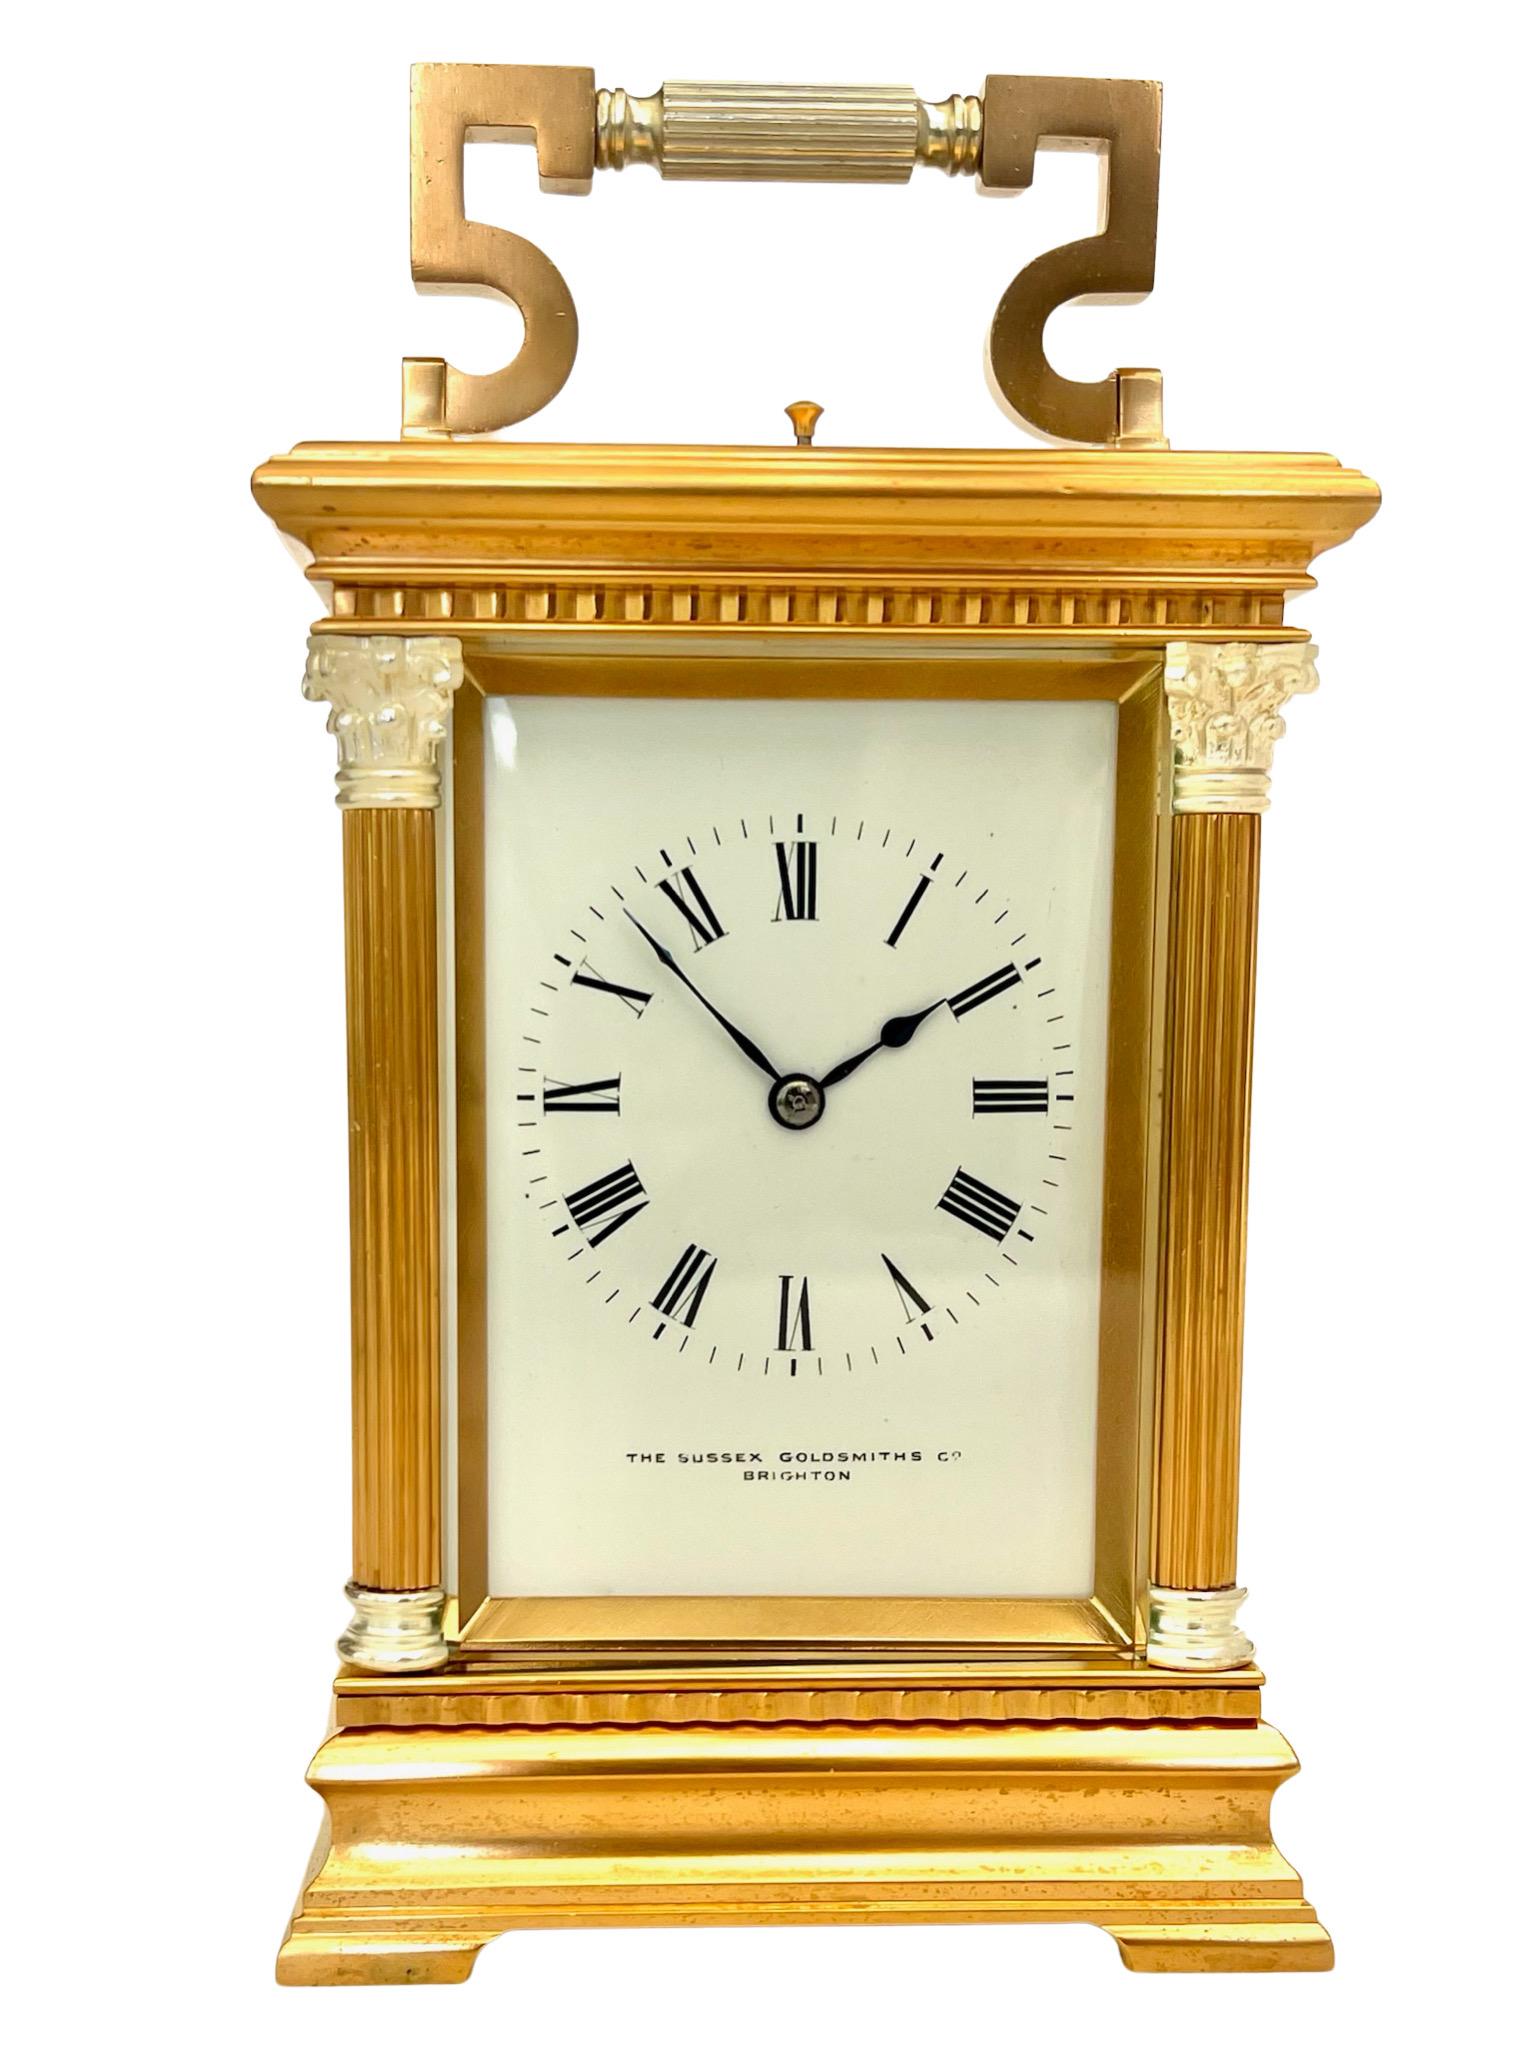 A Substantial French Silvered and Gilt Eight Day Striking and Repeating Carriage clock, E.G.L., Paris. Retailed by The Goldsmiths Company, Brighton

This is a very attractive clock with beautiful cast Corinthian columns and substantial carrying